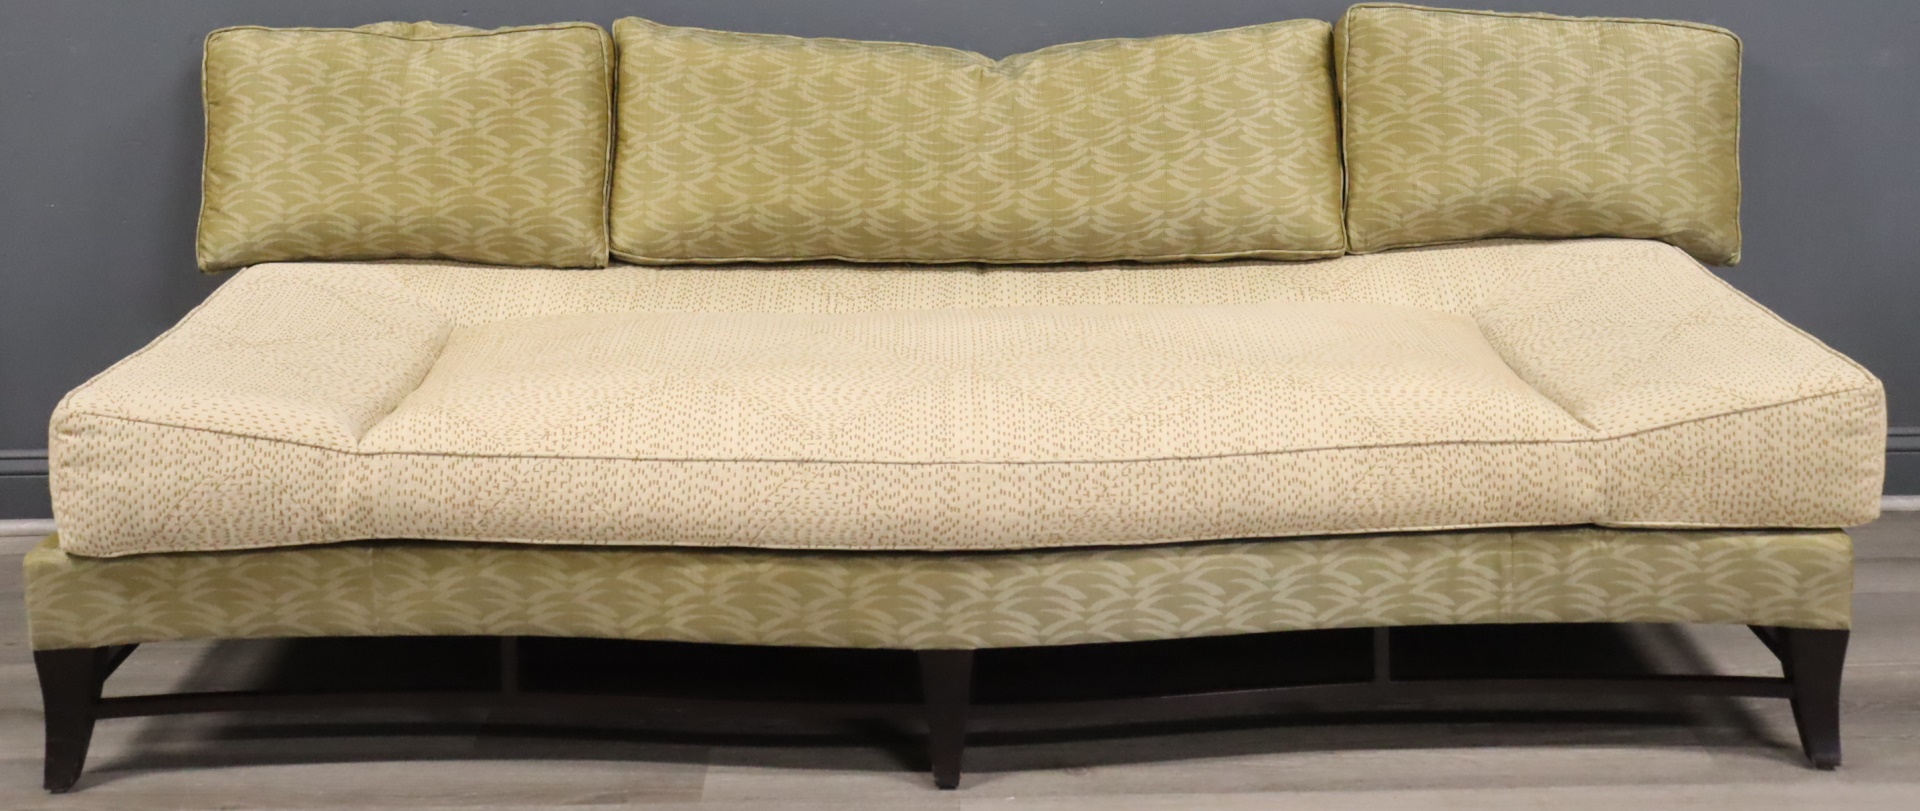 VINTAGE DONGHIA UPHOLSTERED DAY 3b7174